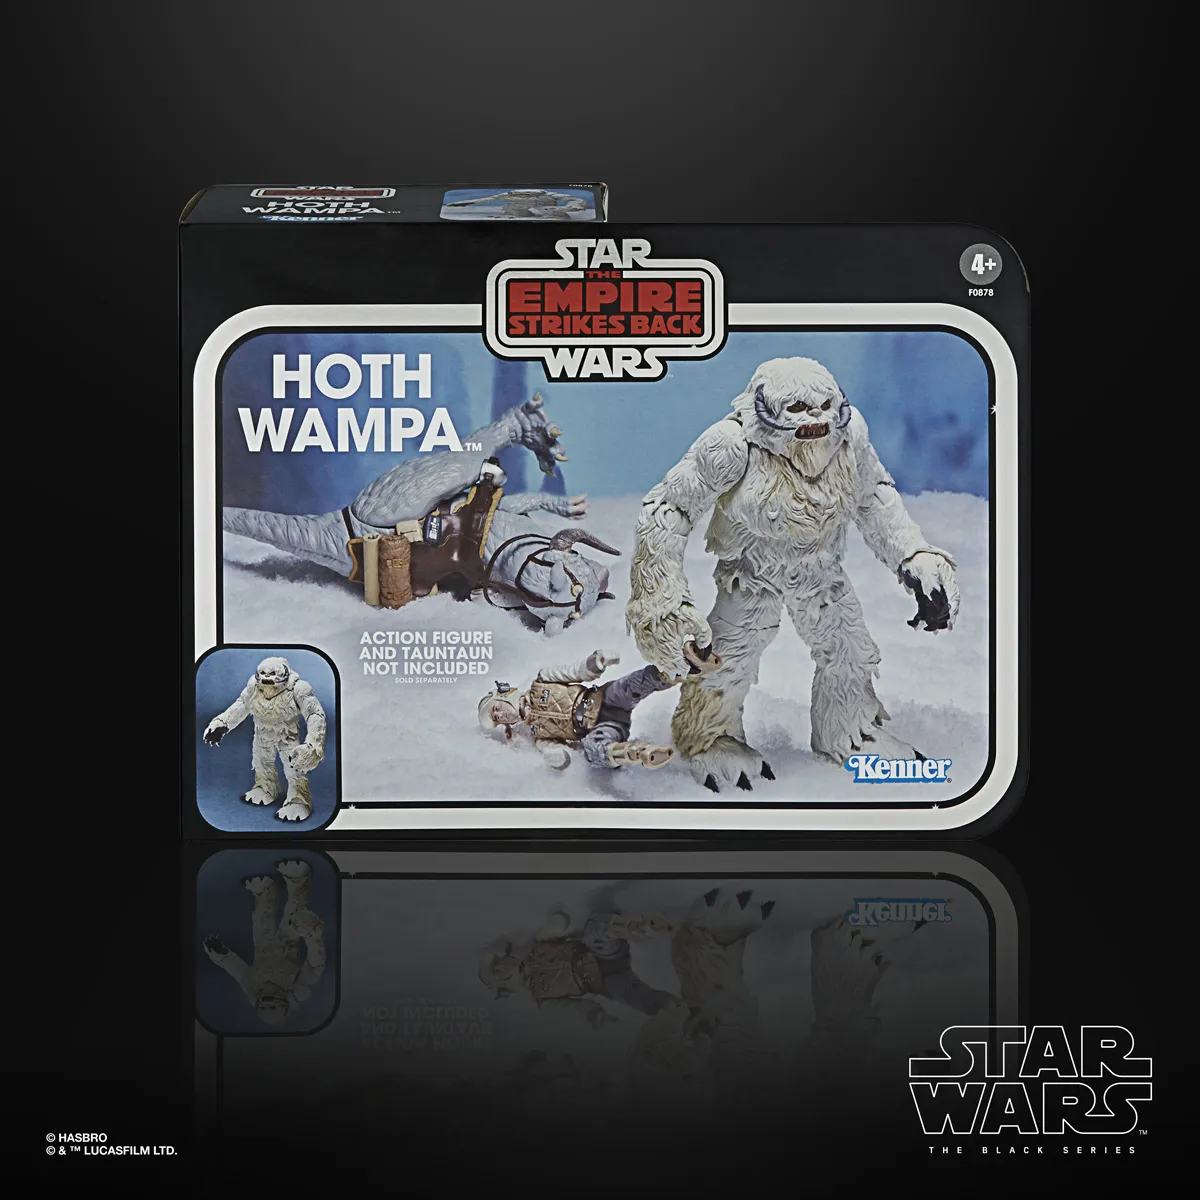 Star Wars The Black Series 6 Inch Scale Hoth Wampa Figure Pckging 2